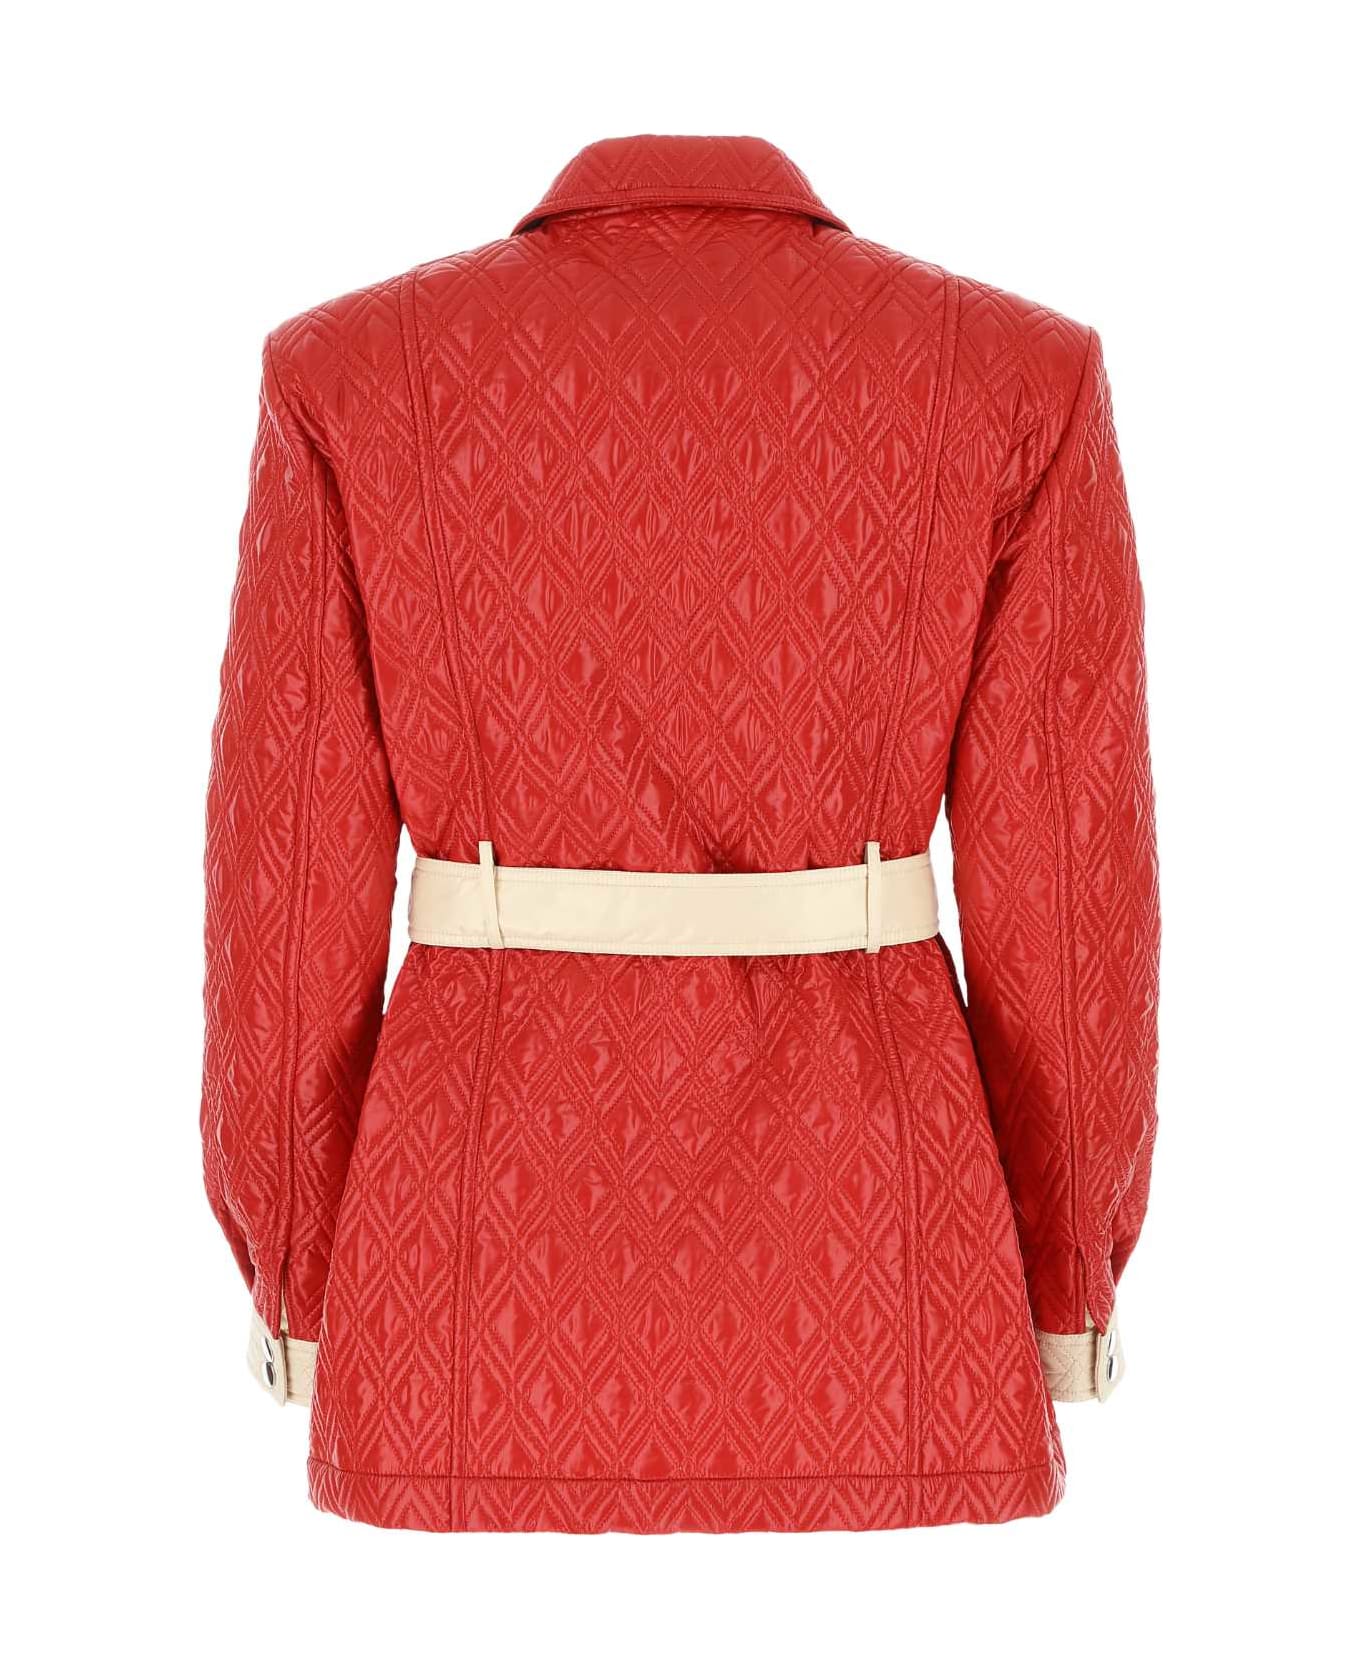 Gucci Red Polyester Jacket - Multicolor